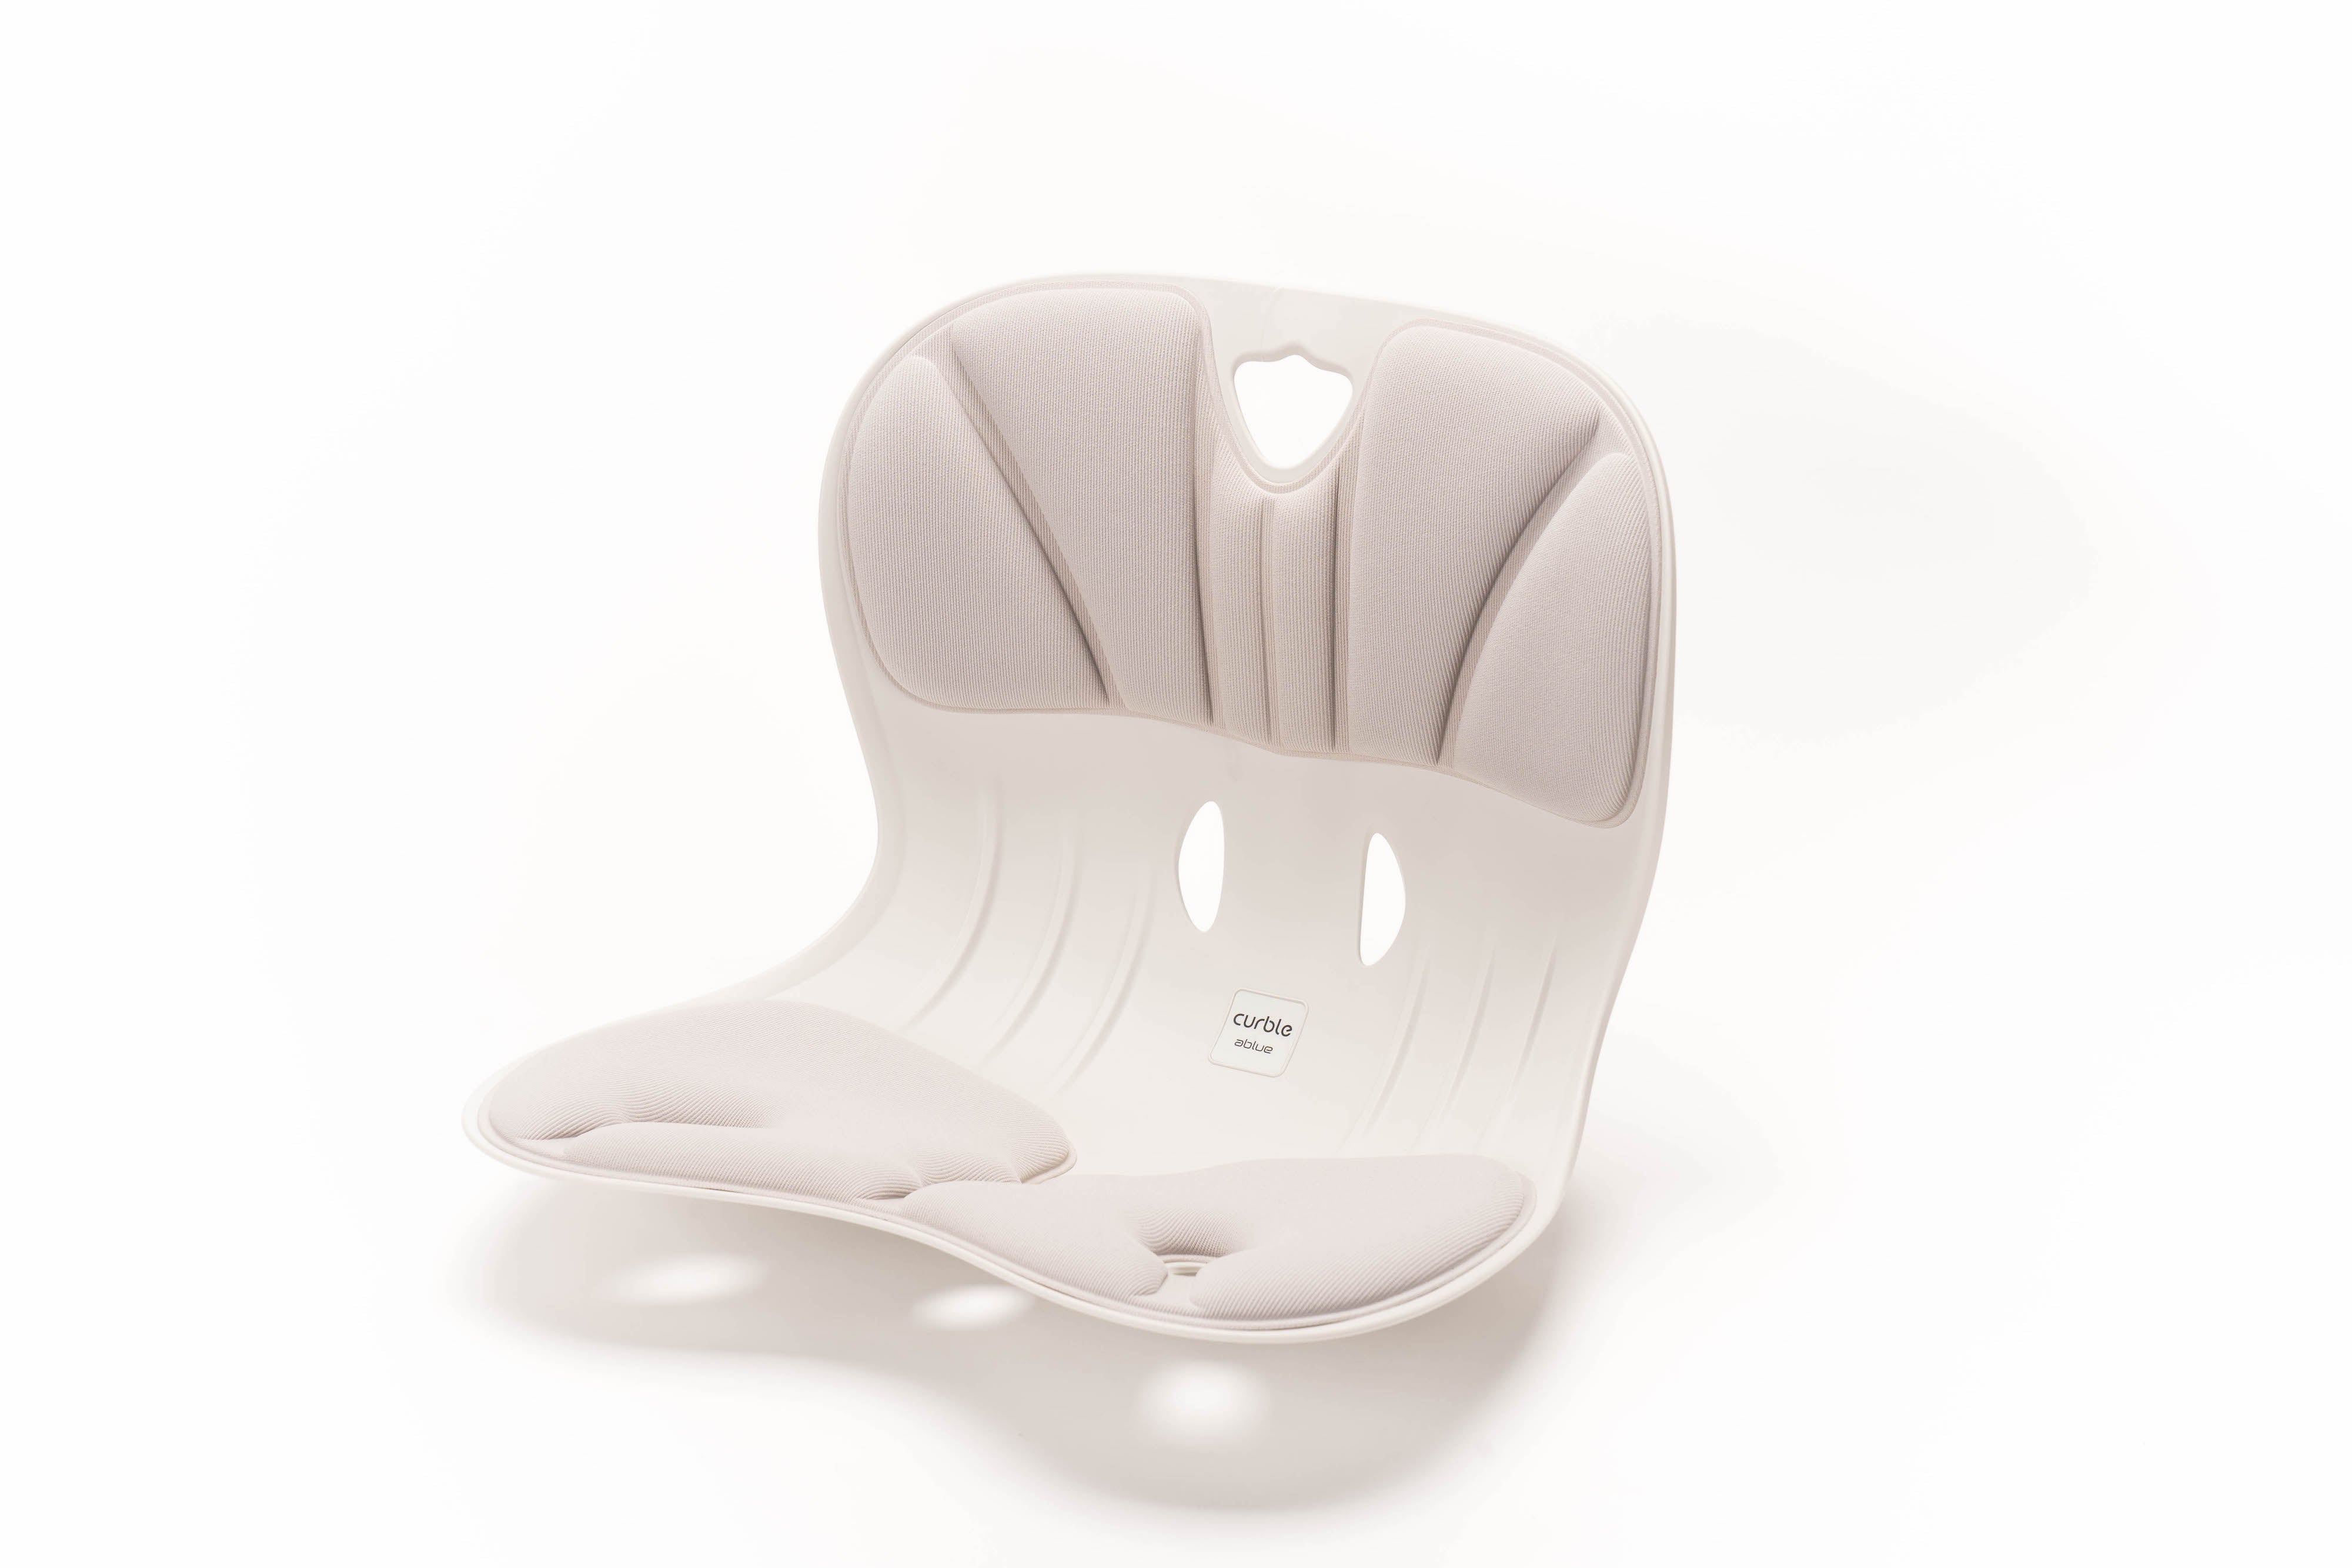 Curble Wider - Curble Chair UK